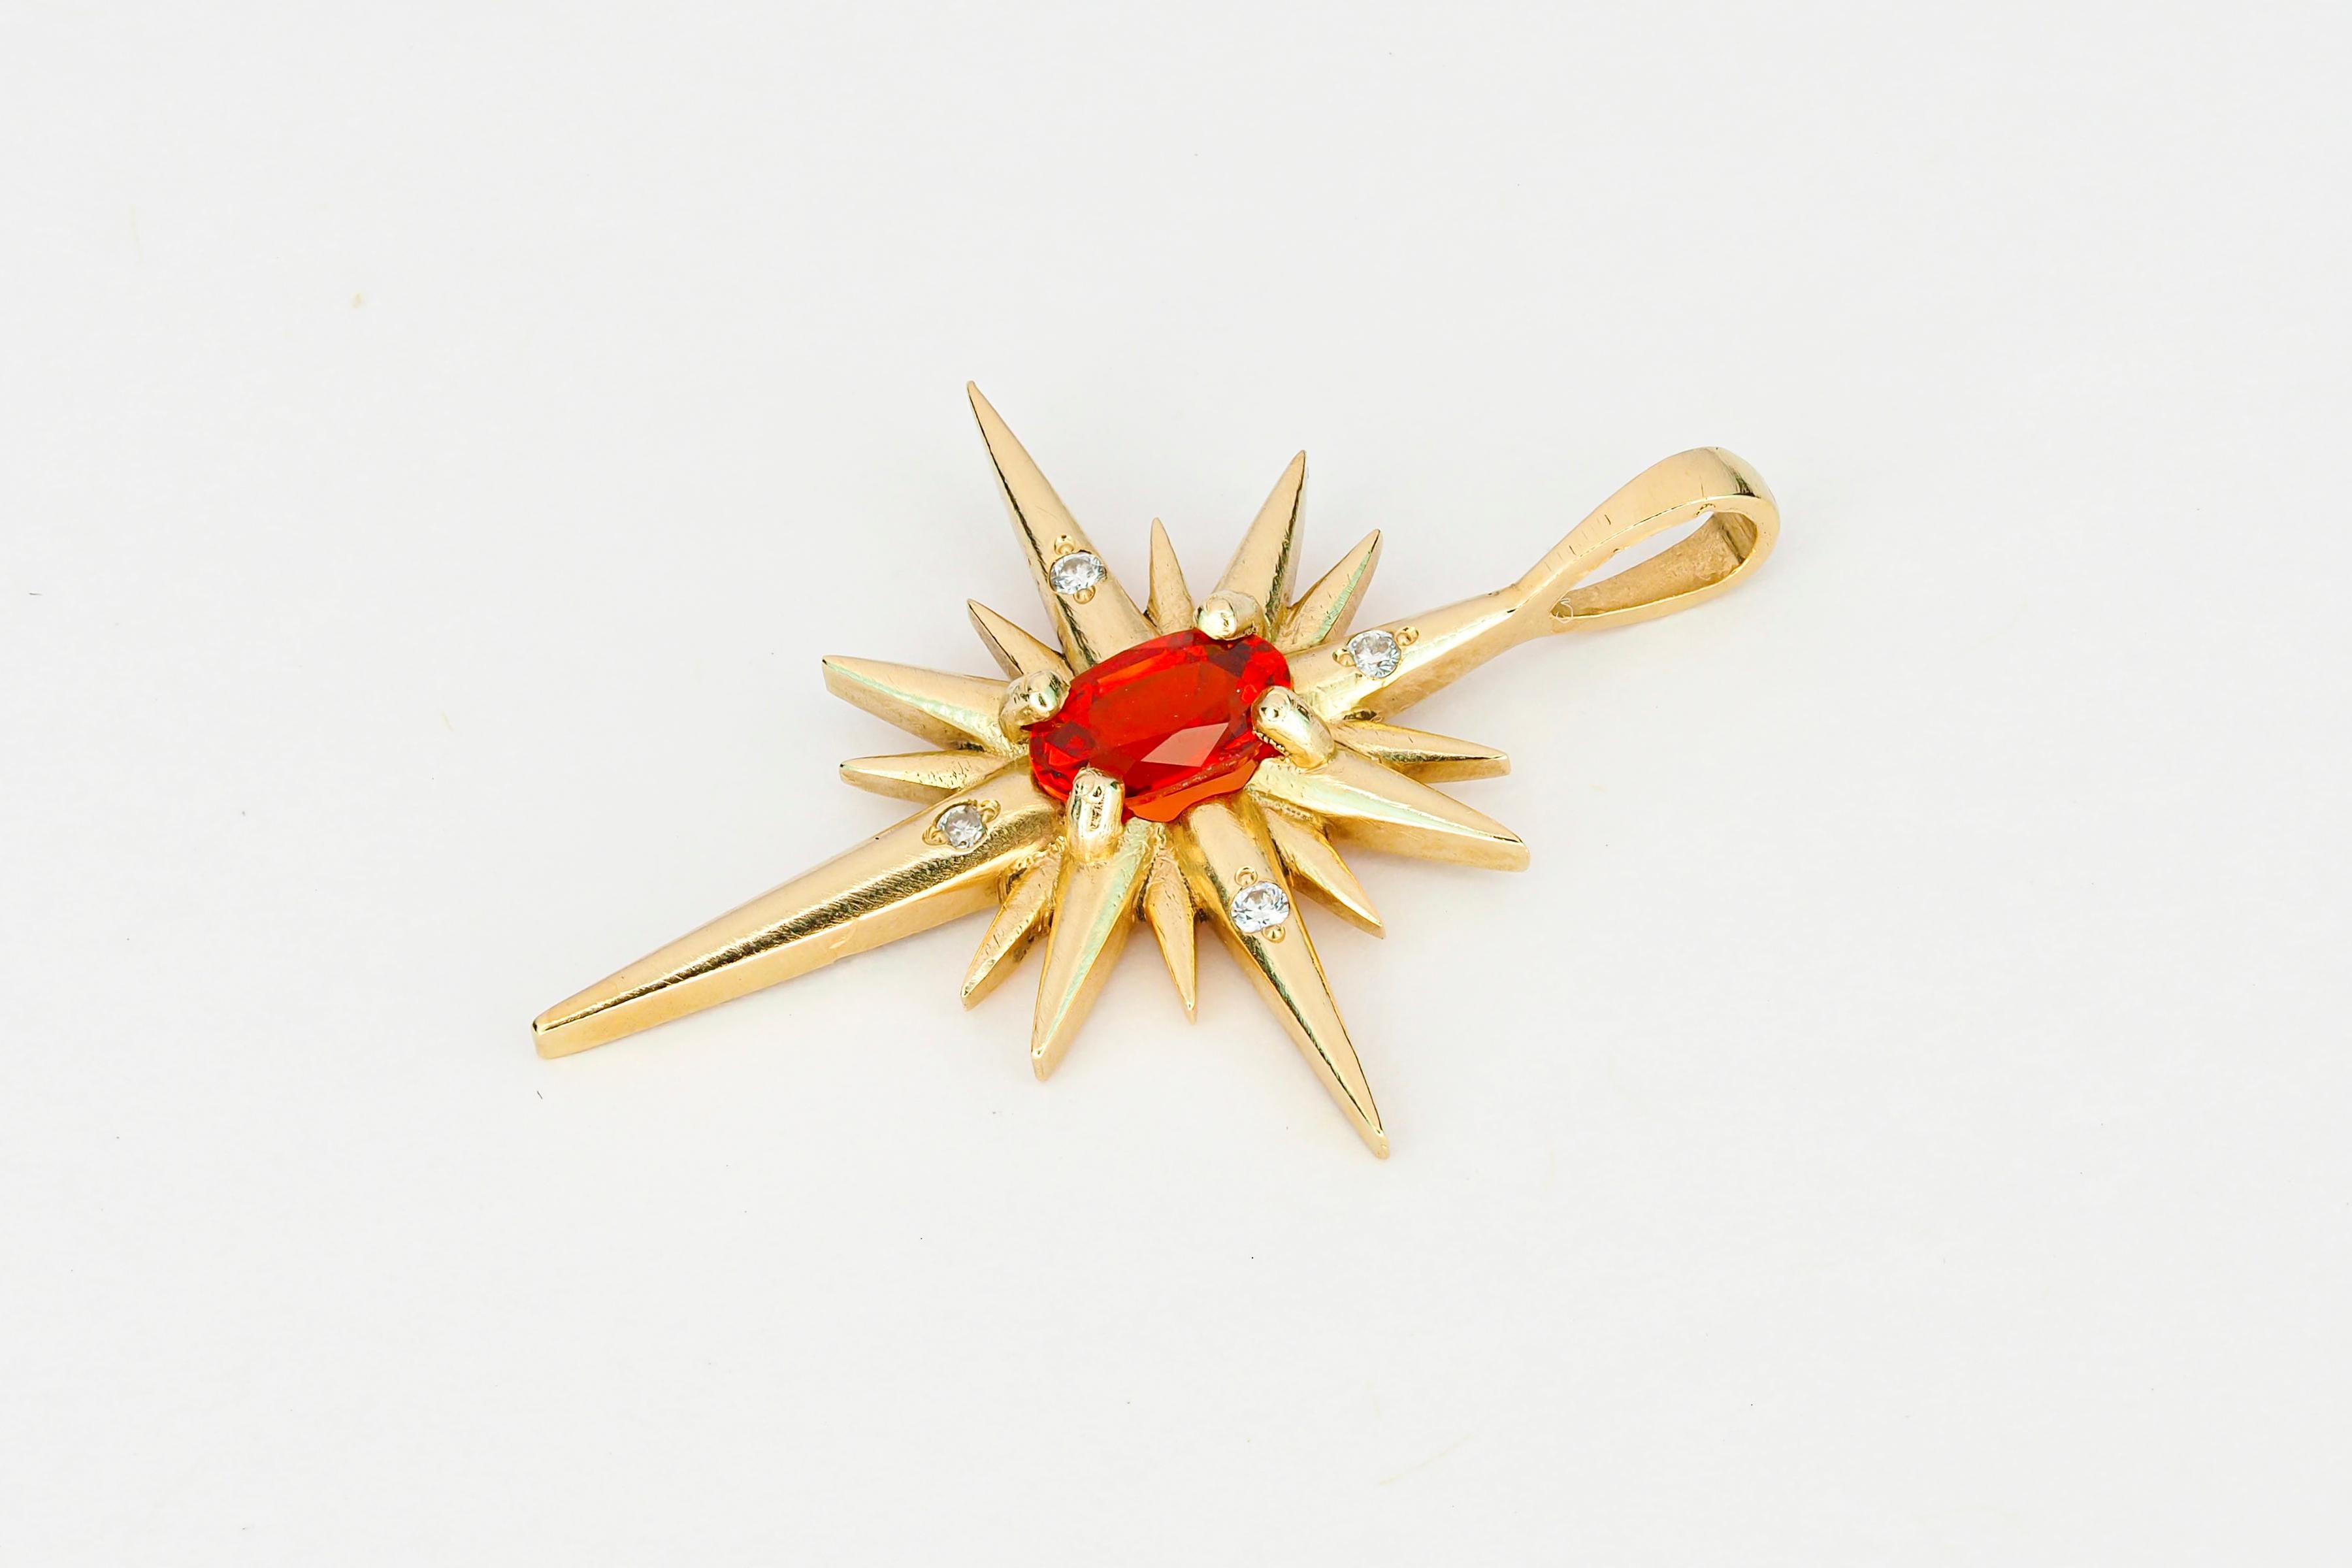 14 kt solid gold Star pendant with orange-red natural sapphire and diamonds. September birthstone.

Metal: 14k gold
Size: 25.5 x 18.5 mm.
Total weight: 1.60 g.

Gemstones:
Natural sapphires: oval shape, orange red color, transparent with inclusions,